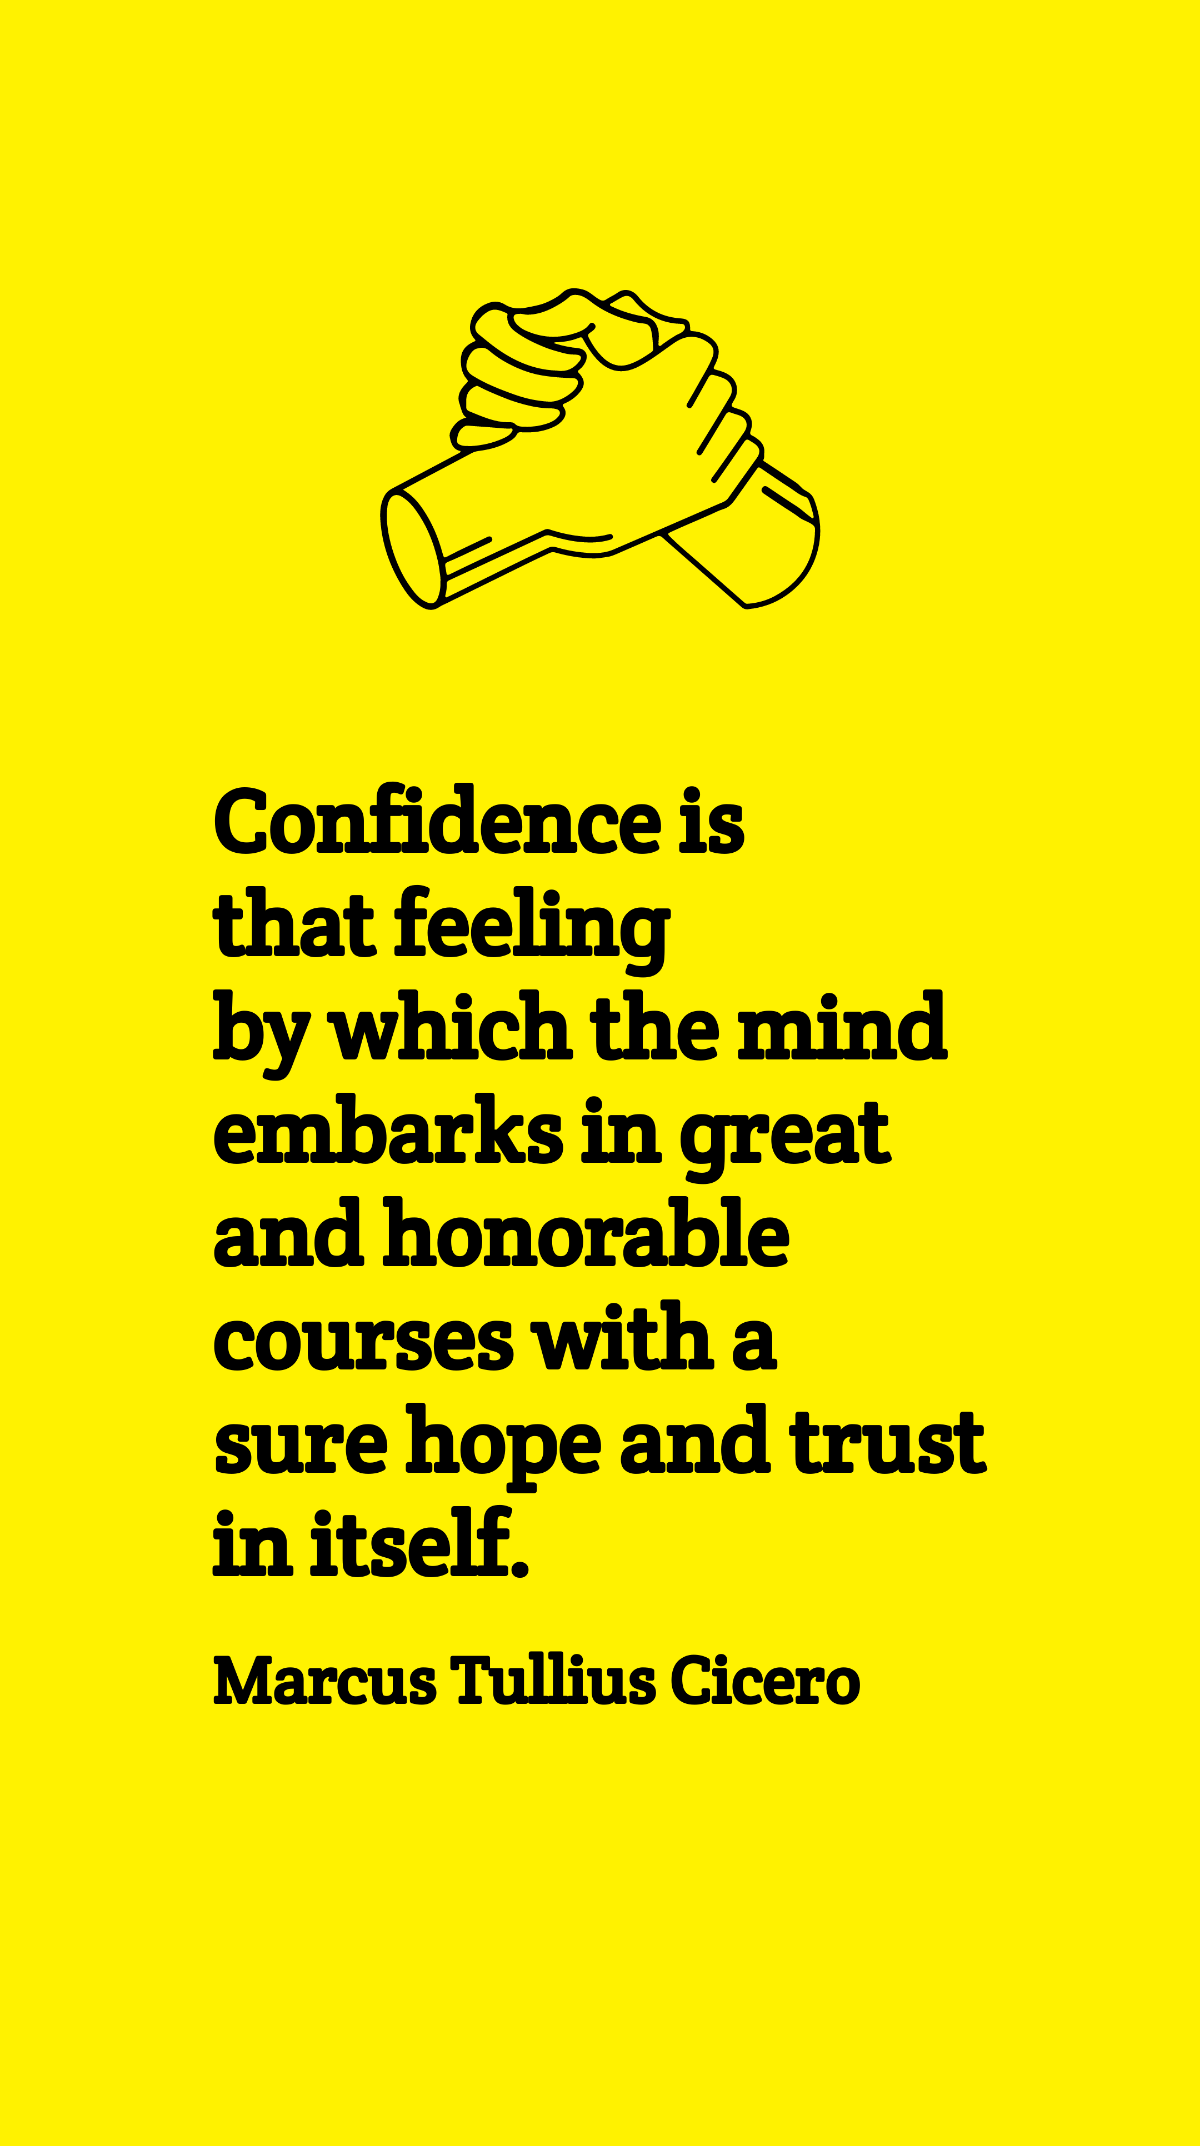 Marcus Tullius Cicero - Confidence is that feeling by which the mind embarks in great and honorable courses with a sure hope and trust in itself. Template